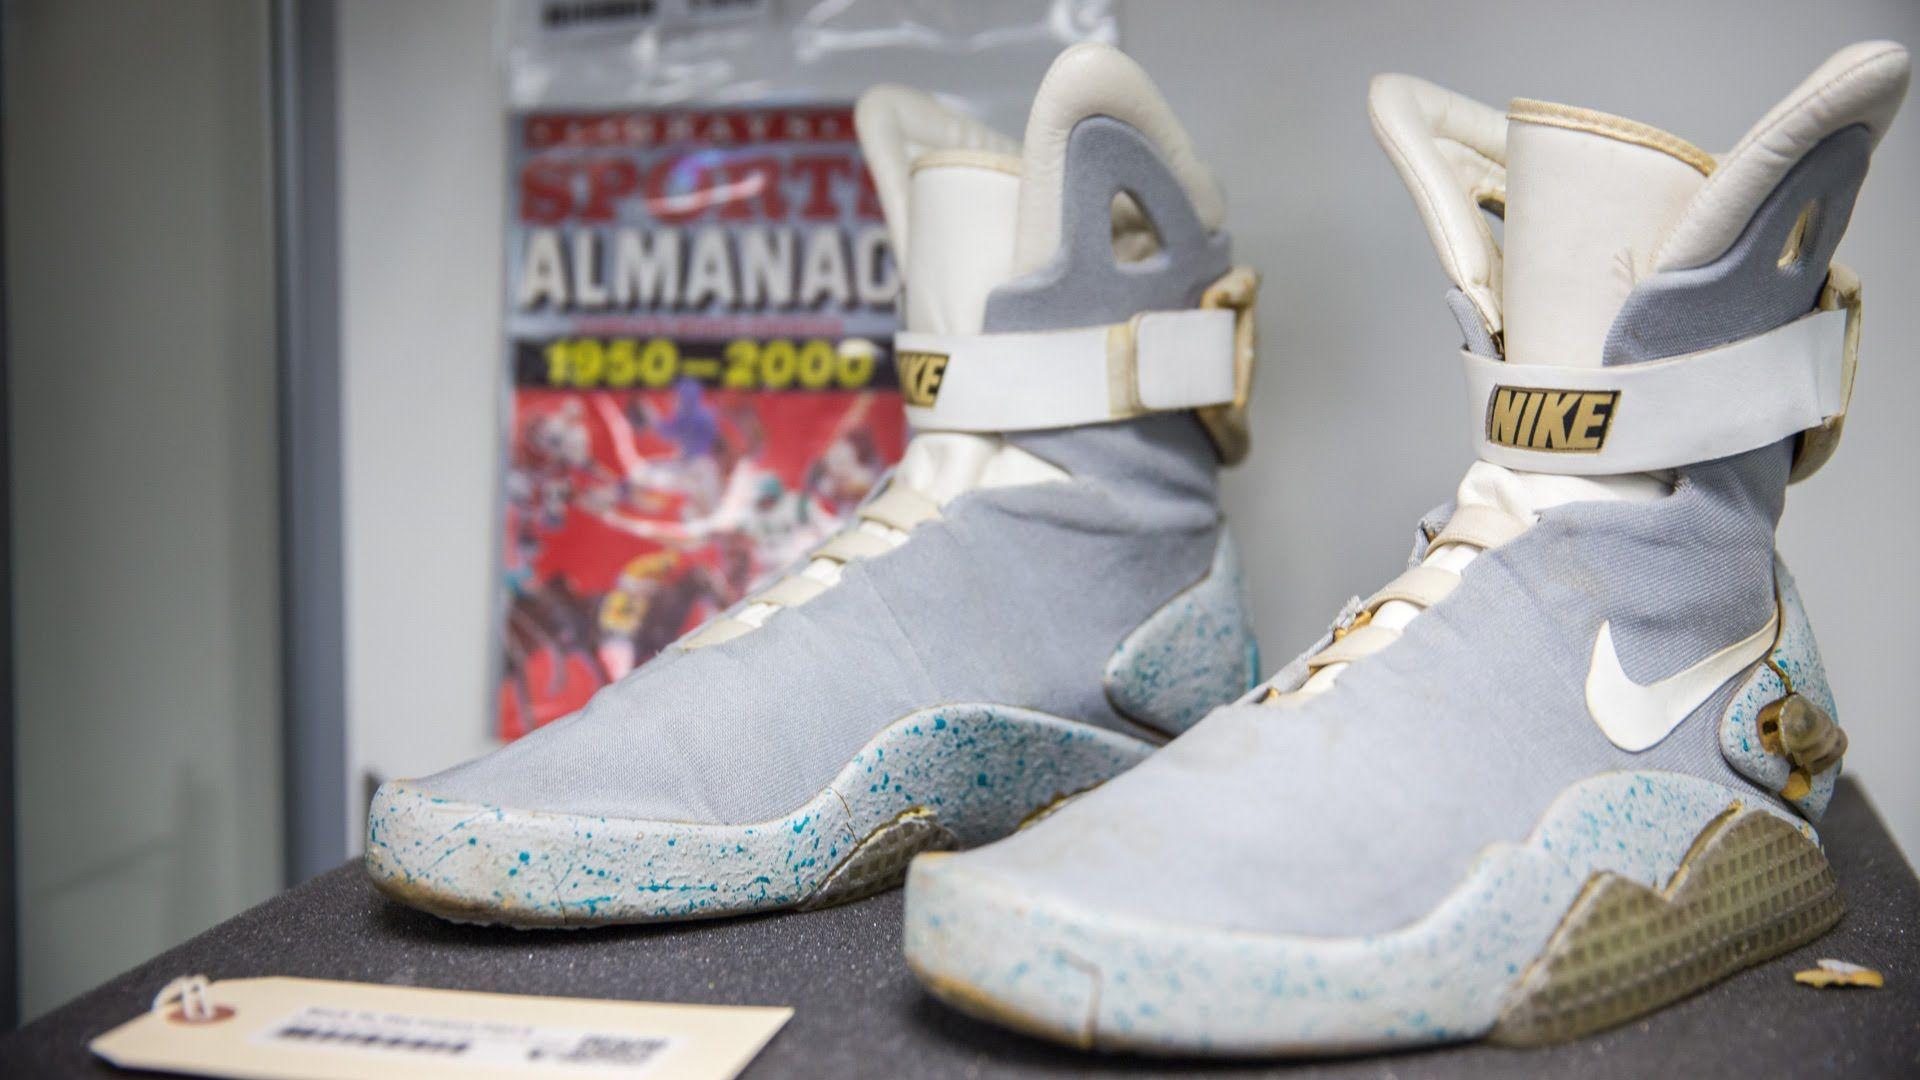 The Real Nike Air Mag Worn By Marty McFly Actually Still Exists